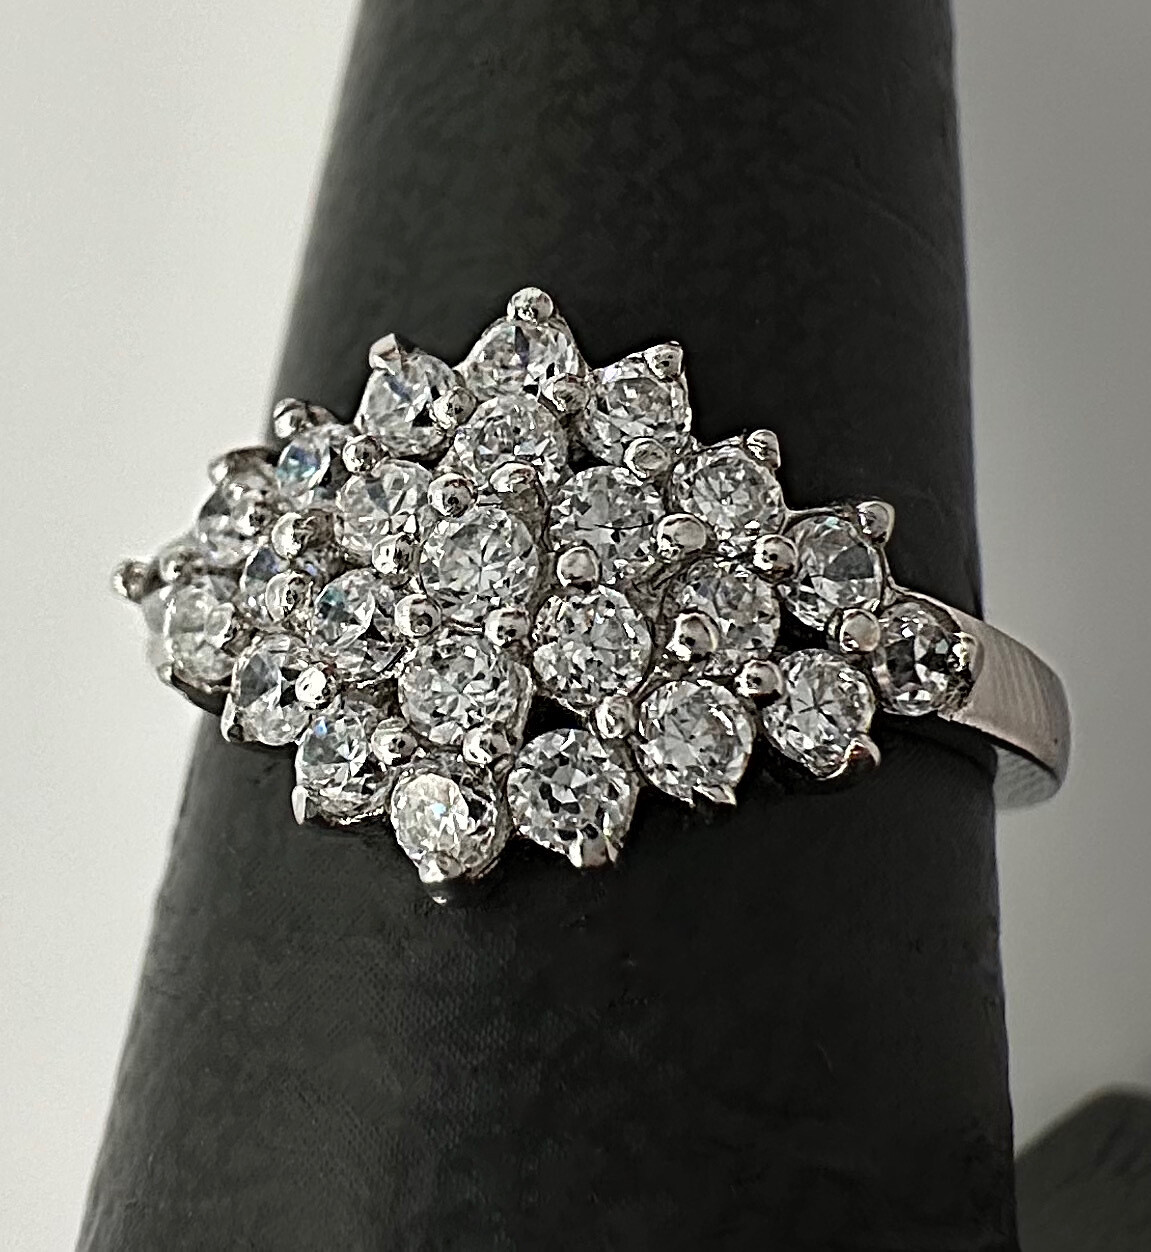 Rhodium Bonded Sterling Silver lab grown Cubic Zirconia stone cluster ring 4.7g Size 7